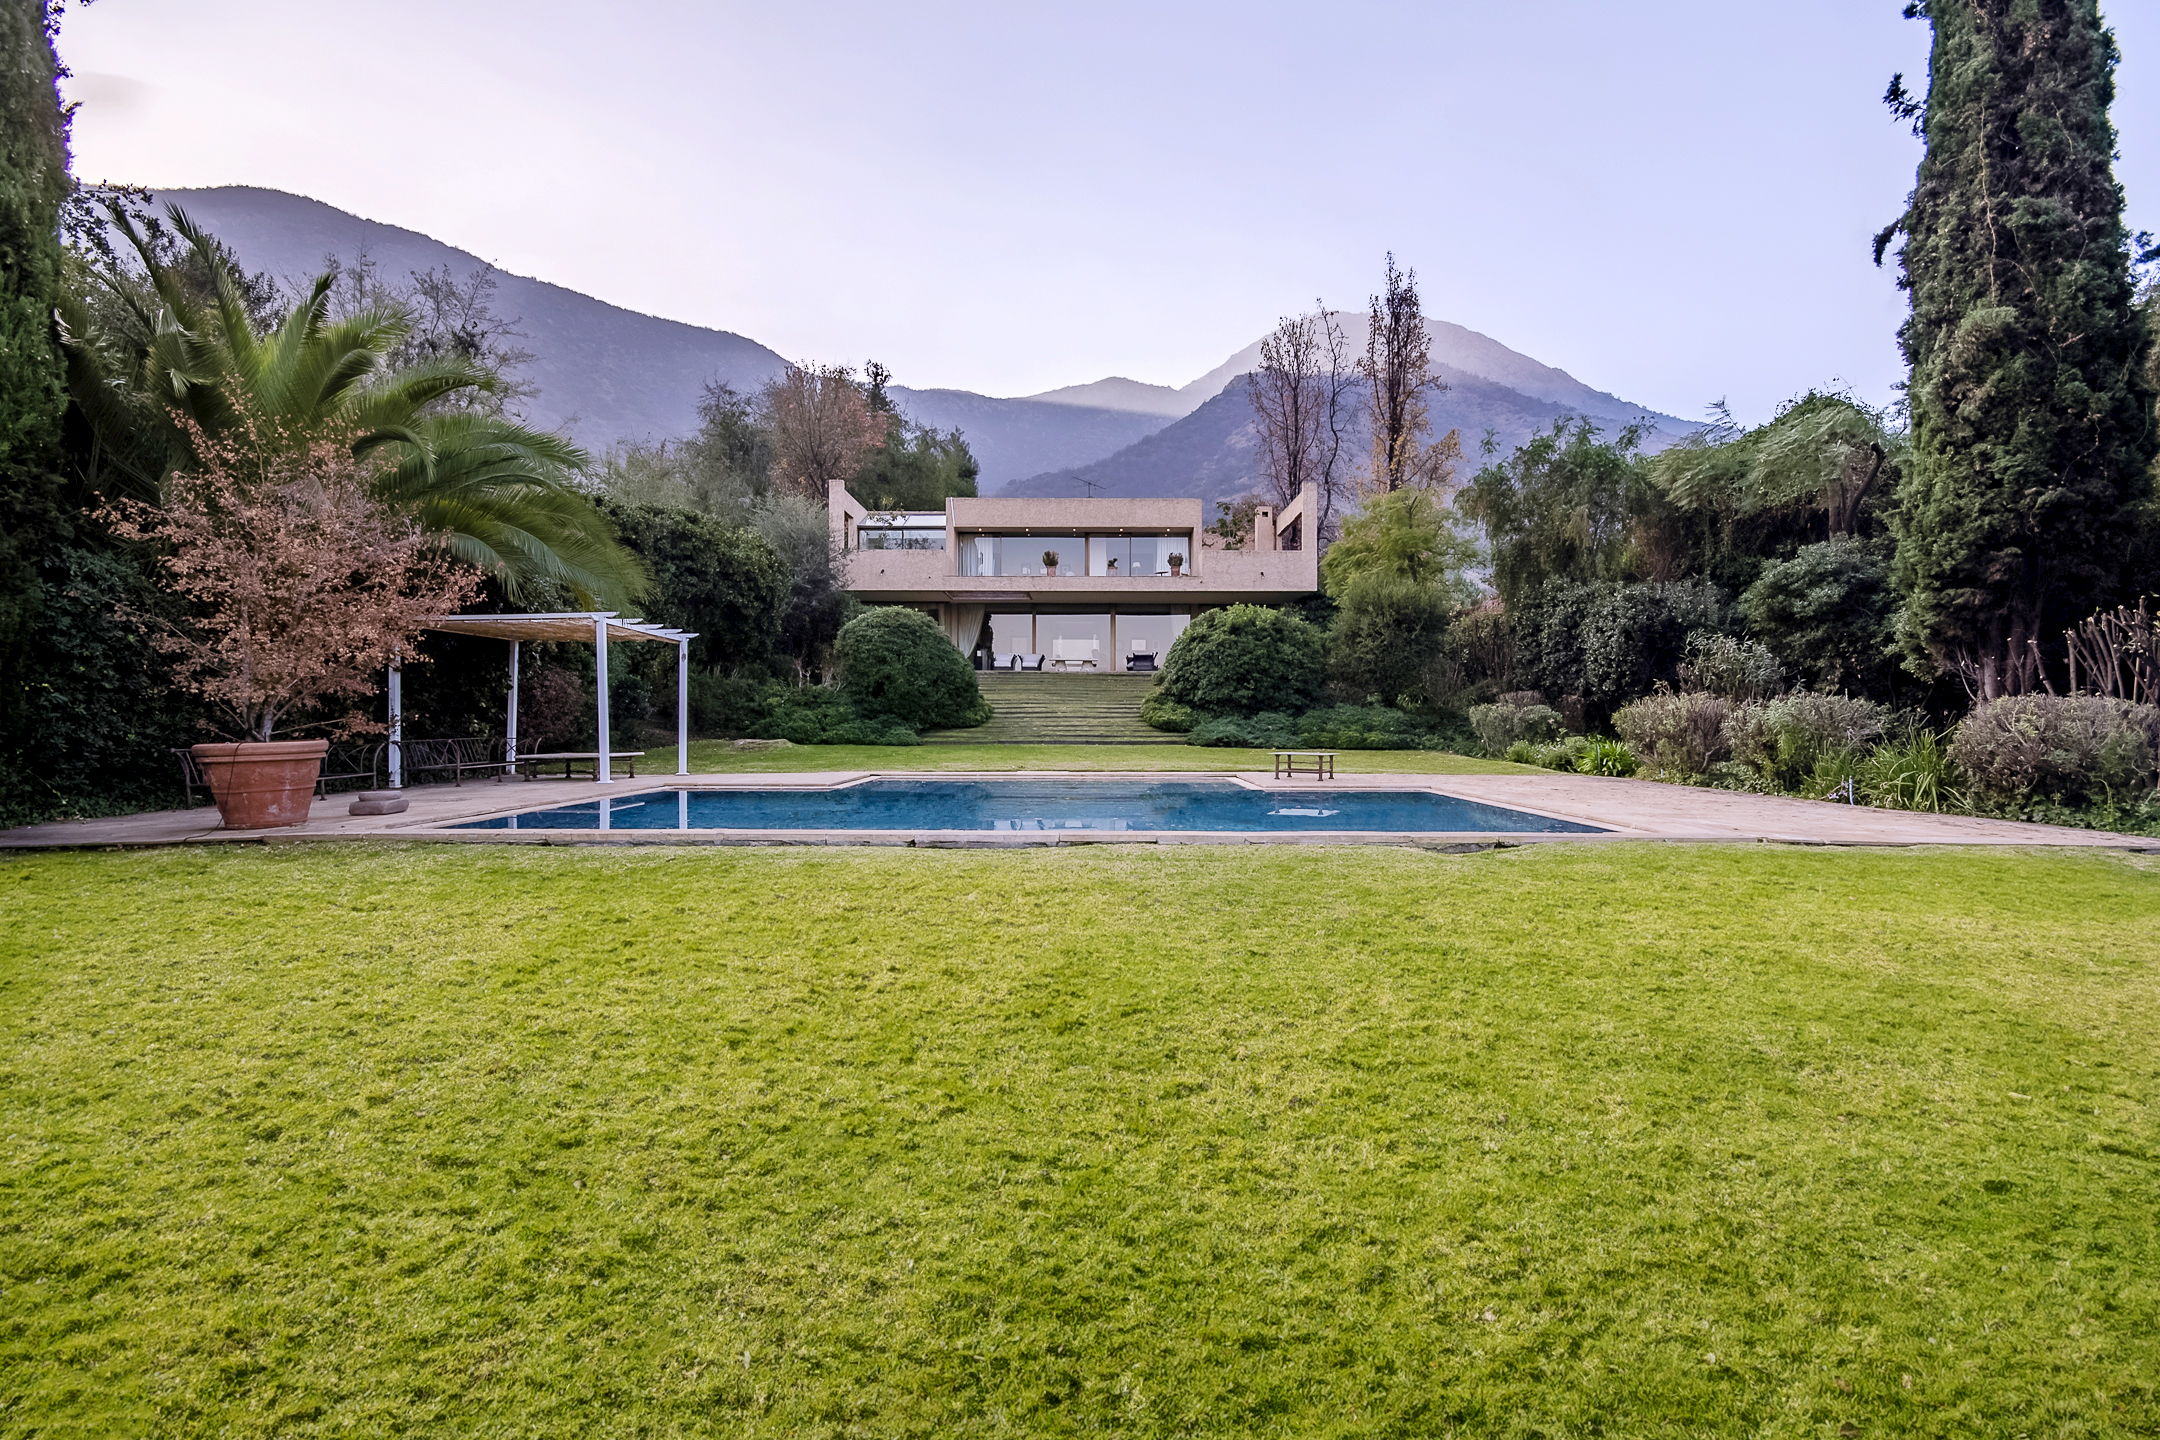 Architect Christian De Groote house with unbeatable location in Santa Maria